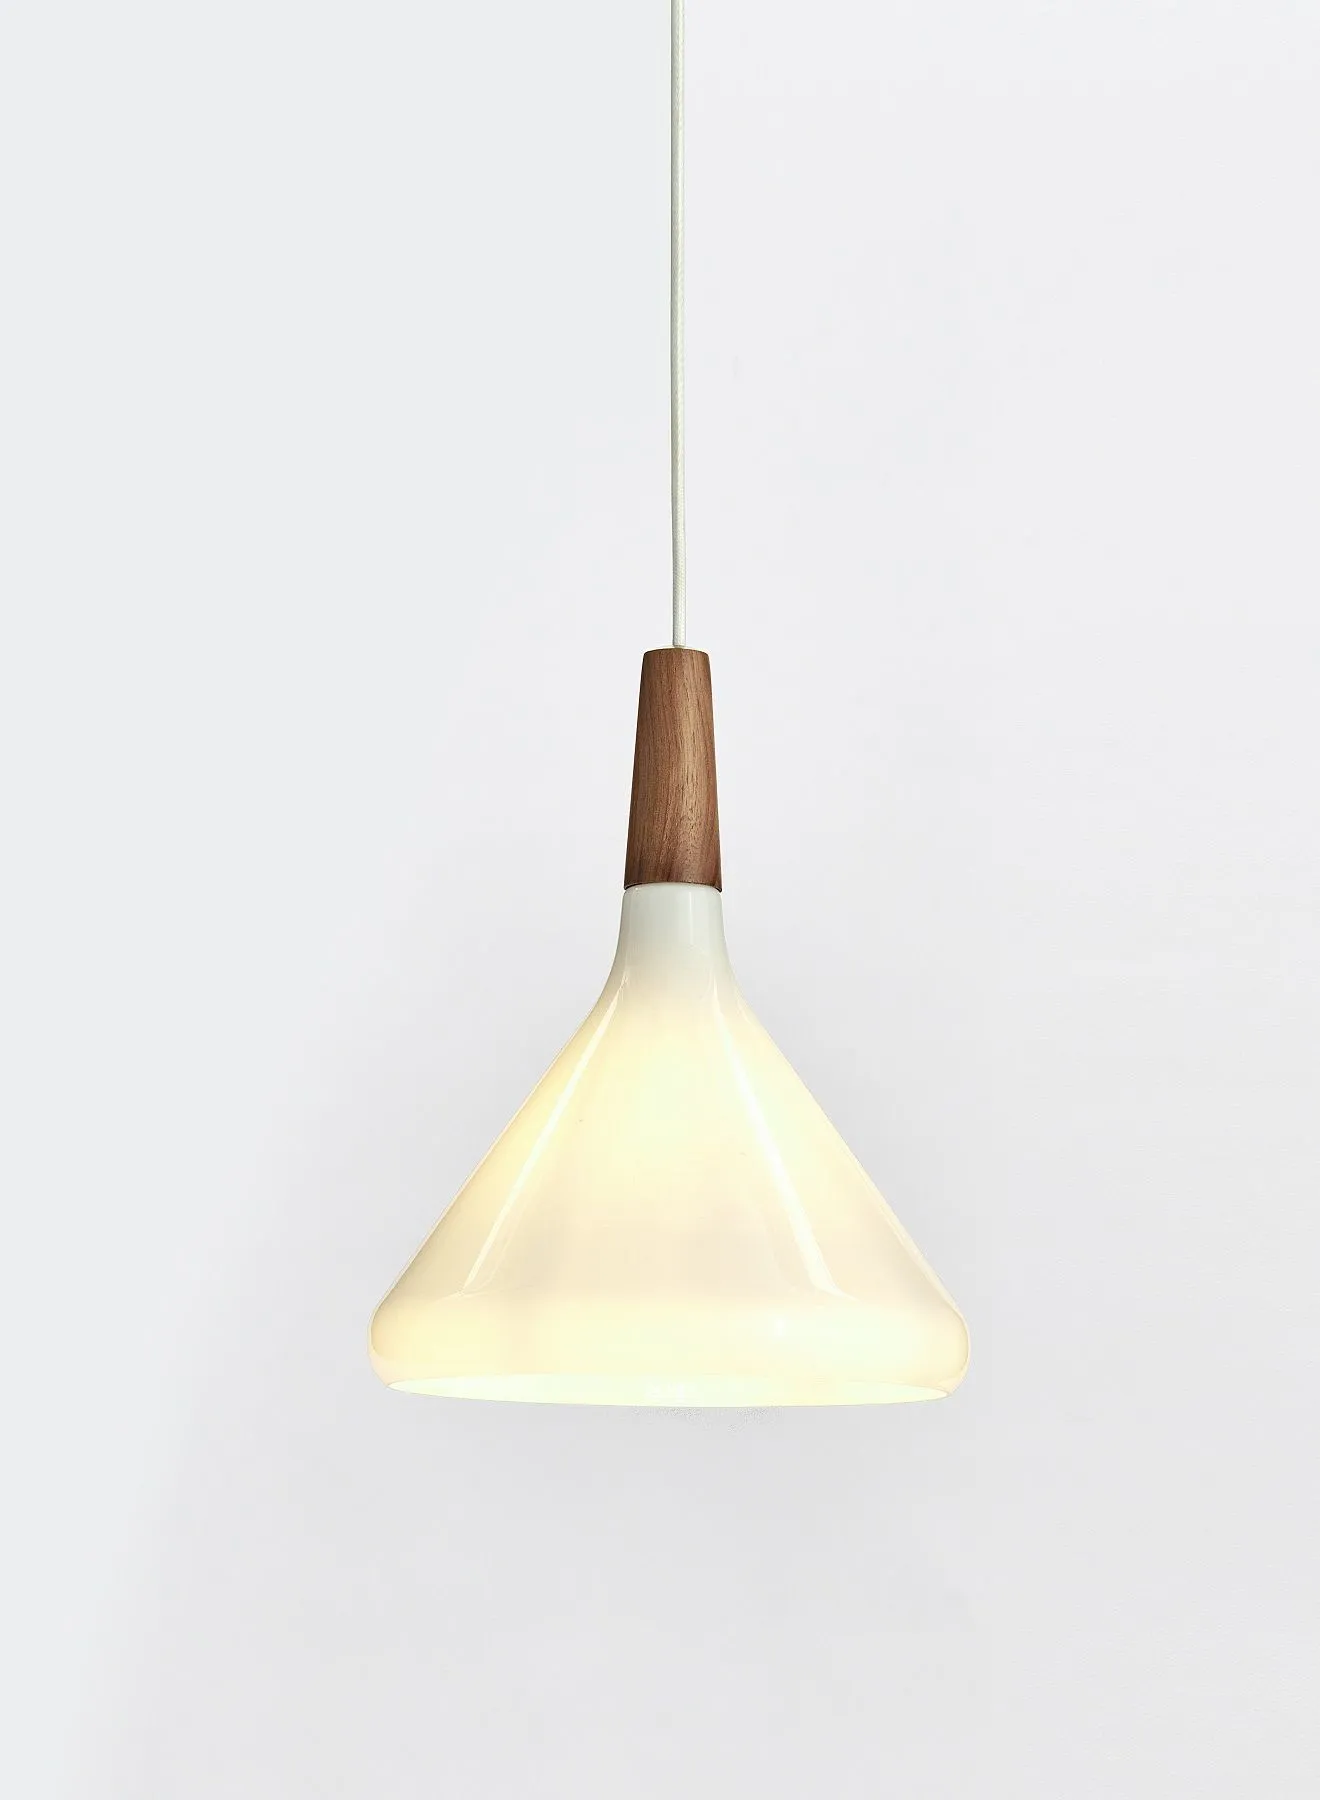 Switch Decorative Pendant Lamp Unique Luxury Quality Material for the Perfect Stylish Home PL014211 White/Brown 27cm